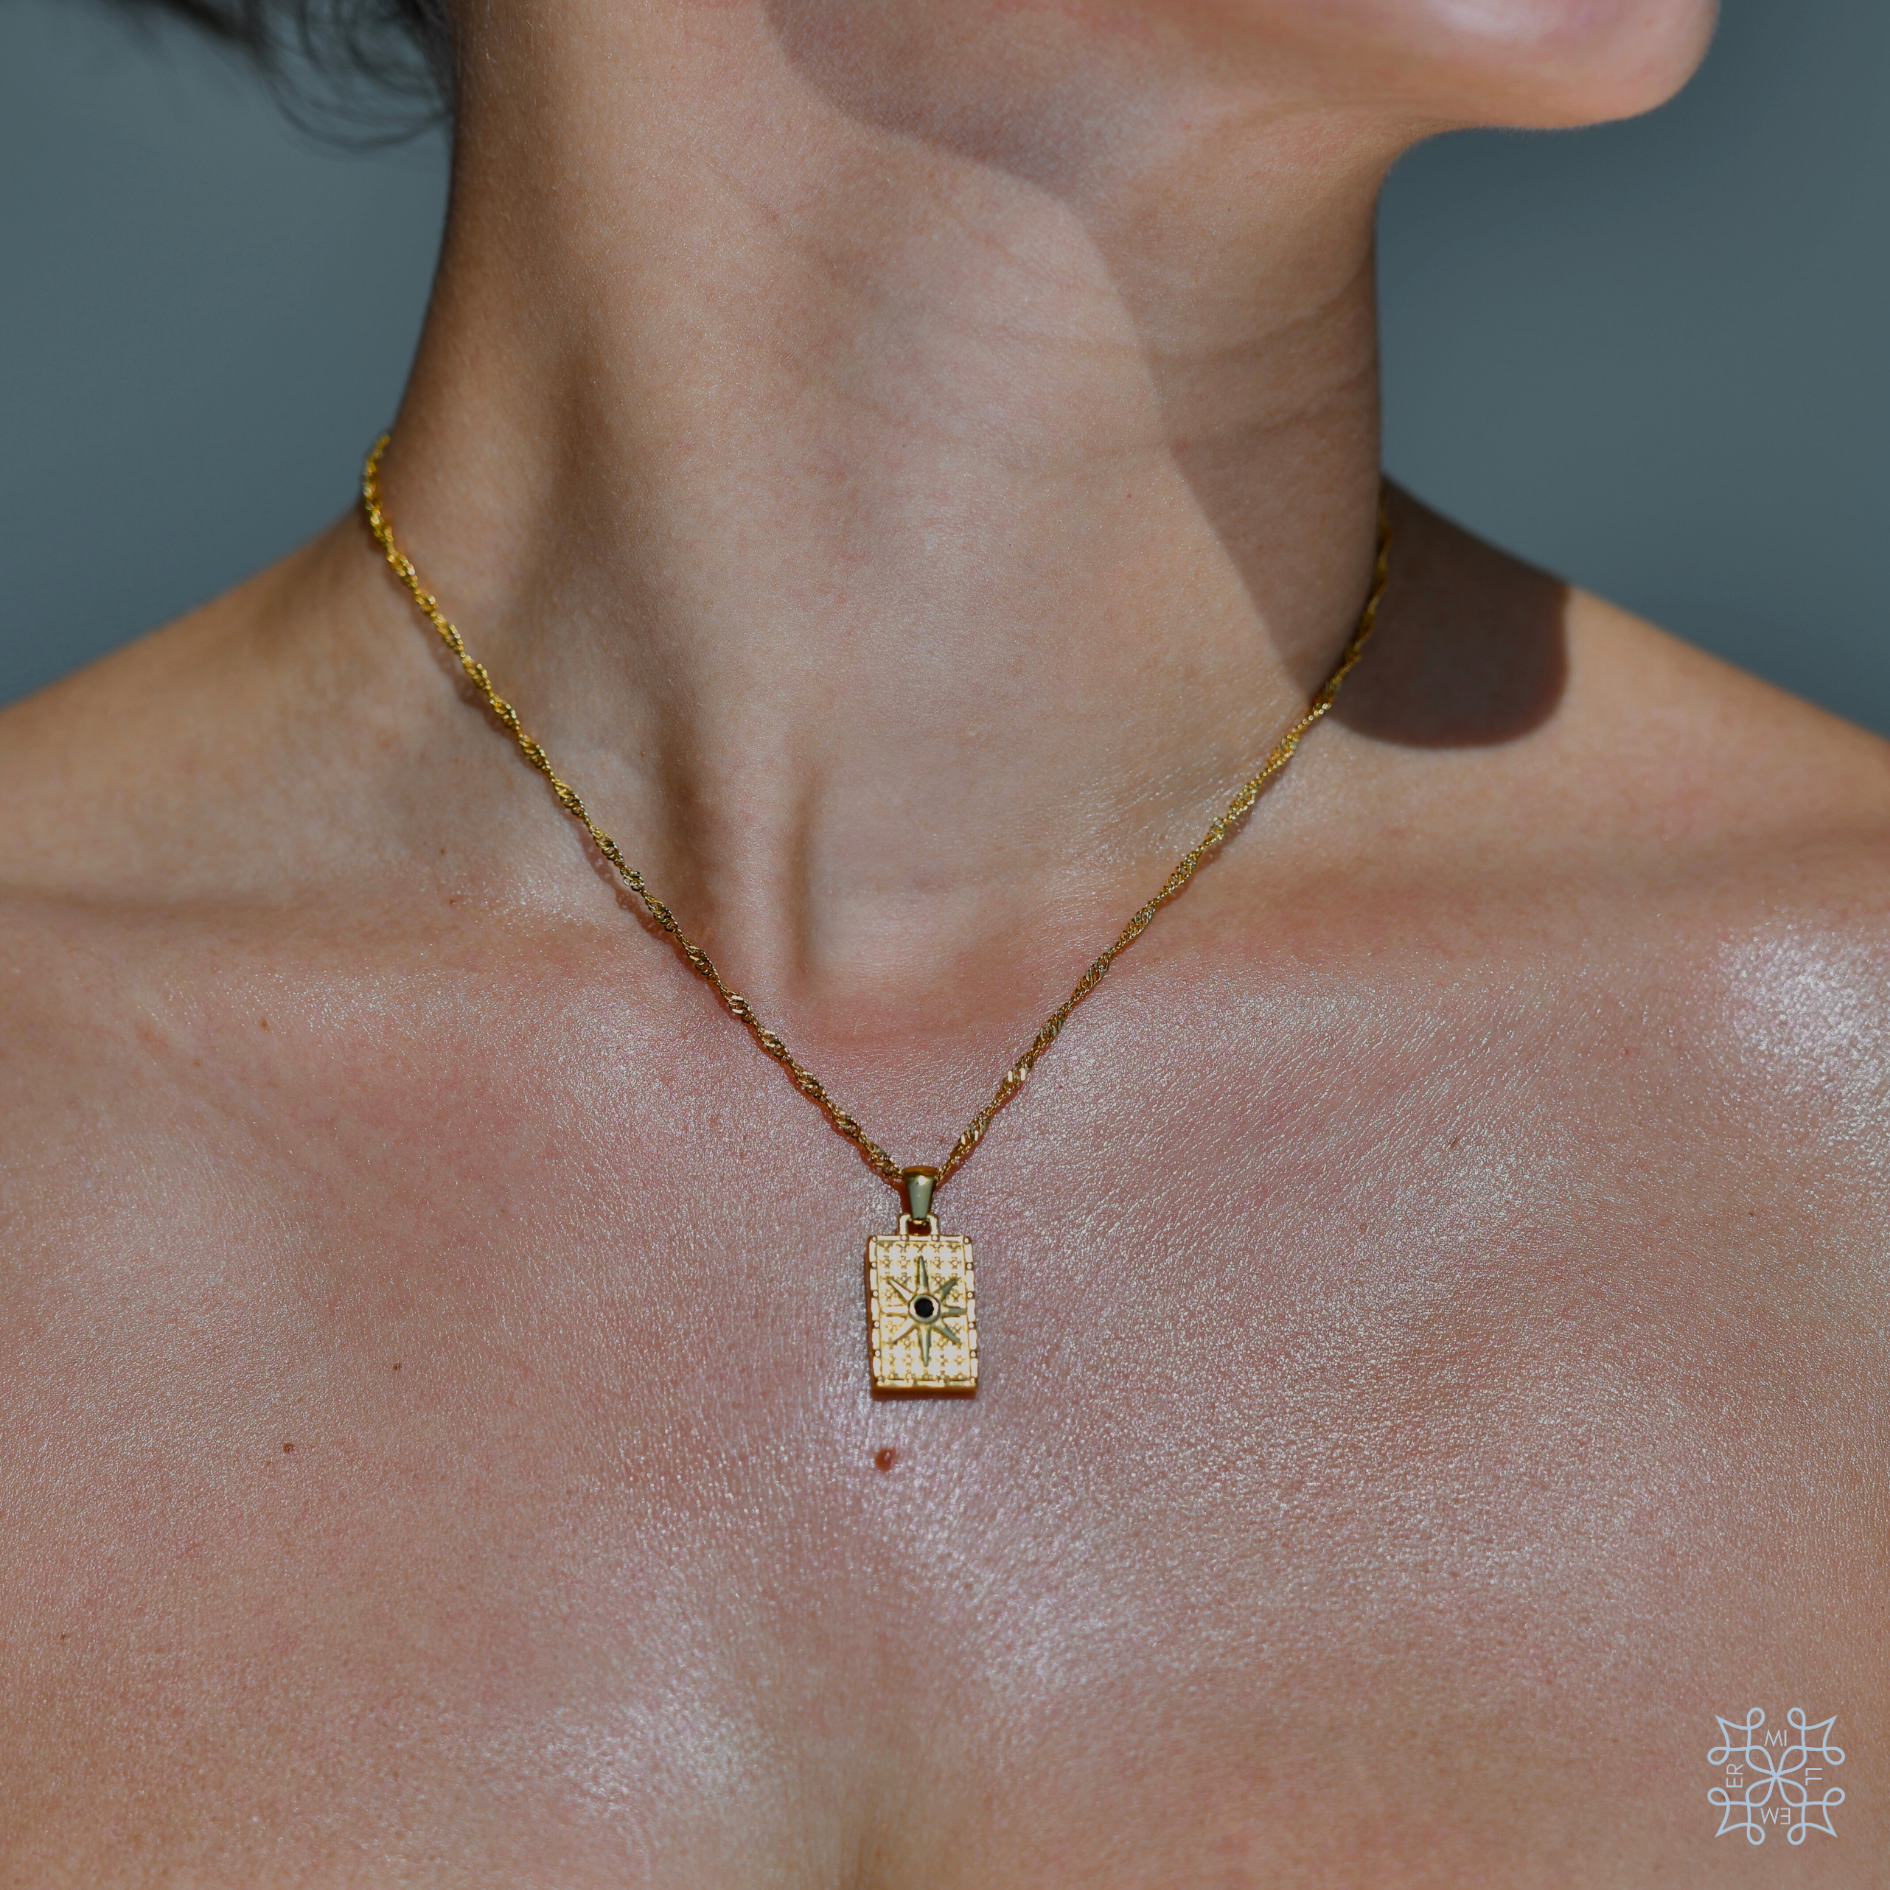 Rectangular compass Gold pendant. A star engraved in the top of the pendant with a black zircon in the middle. th ependant has the same design in both sides of ot. It has a long gold chain. 